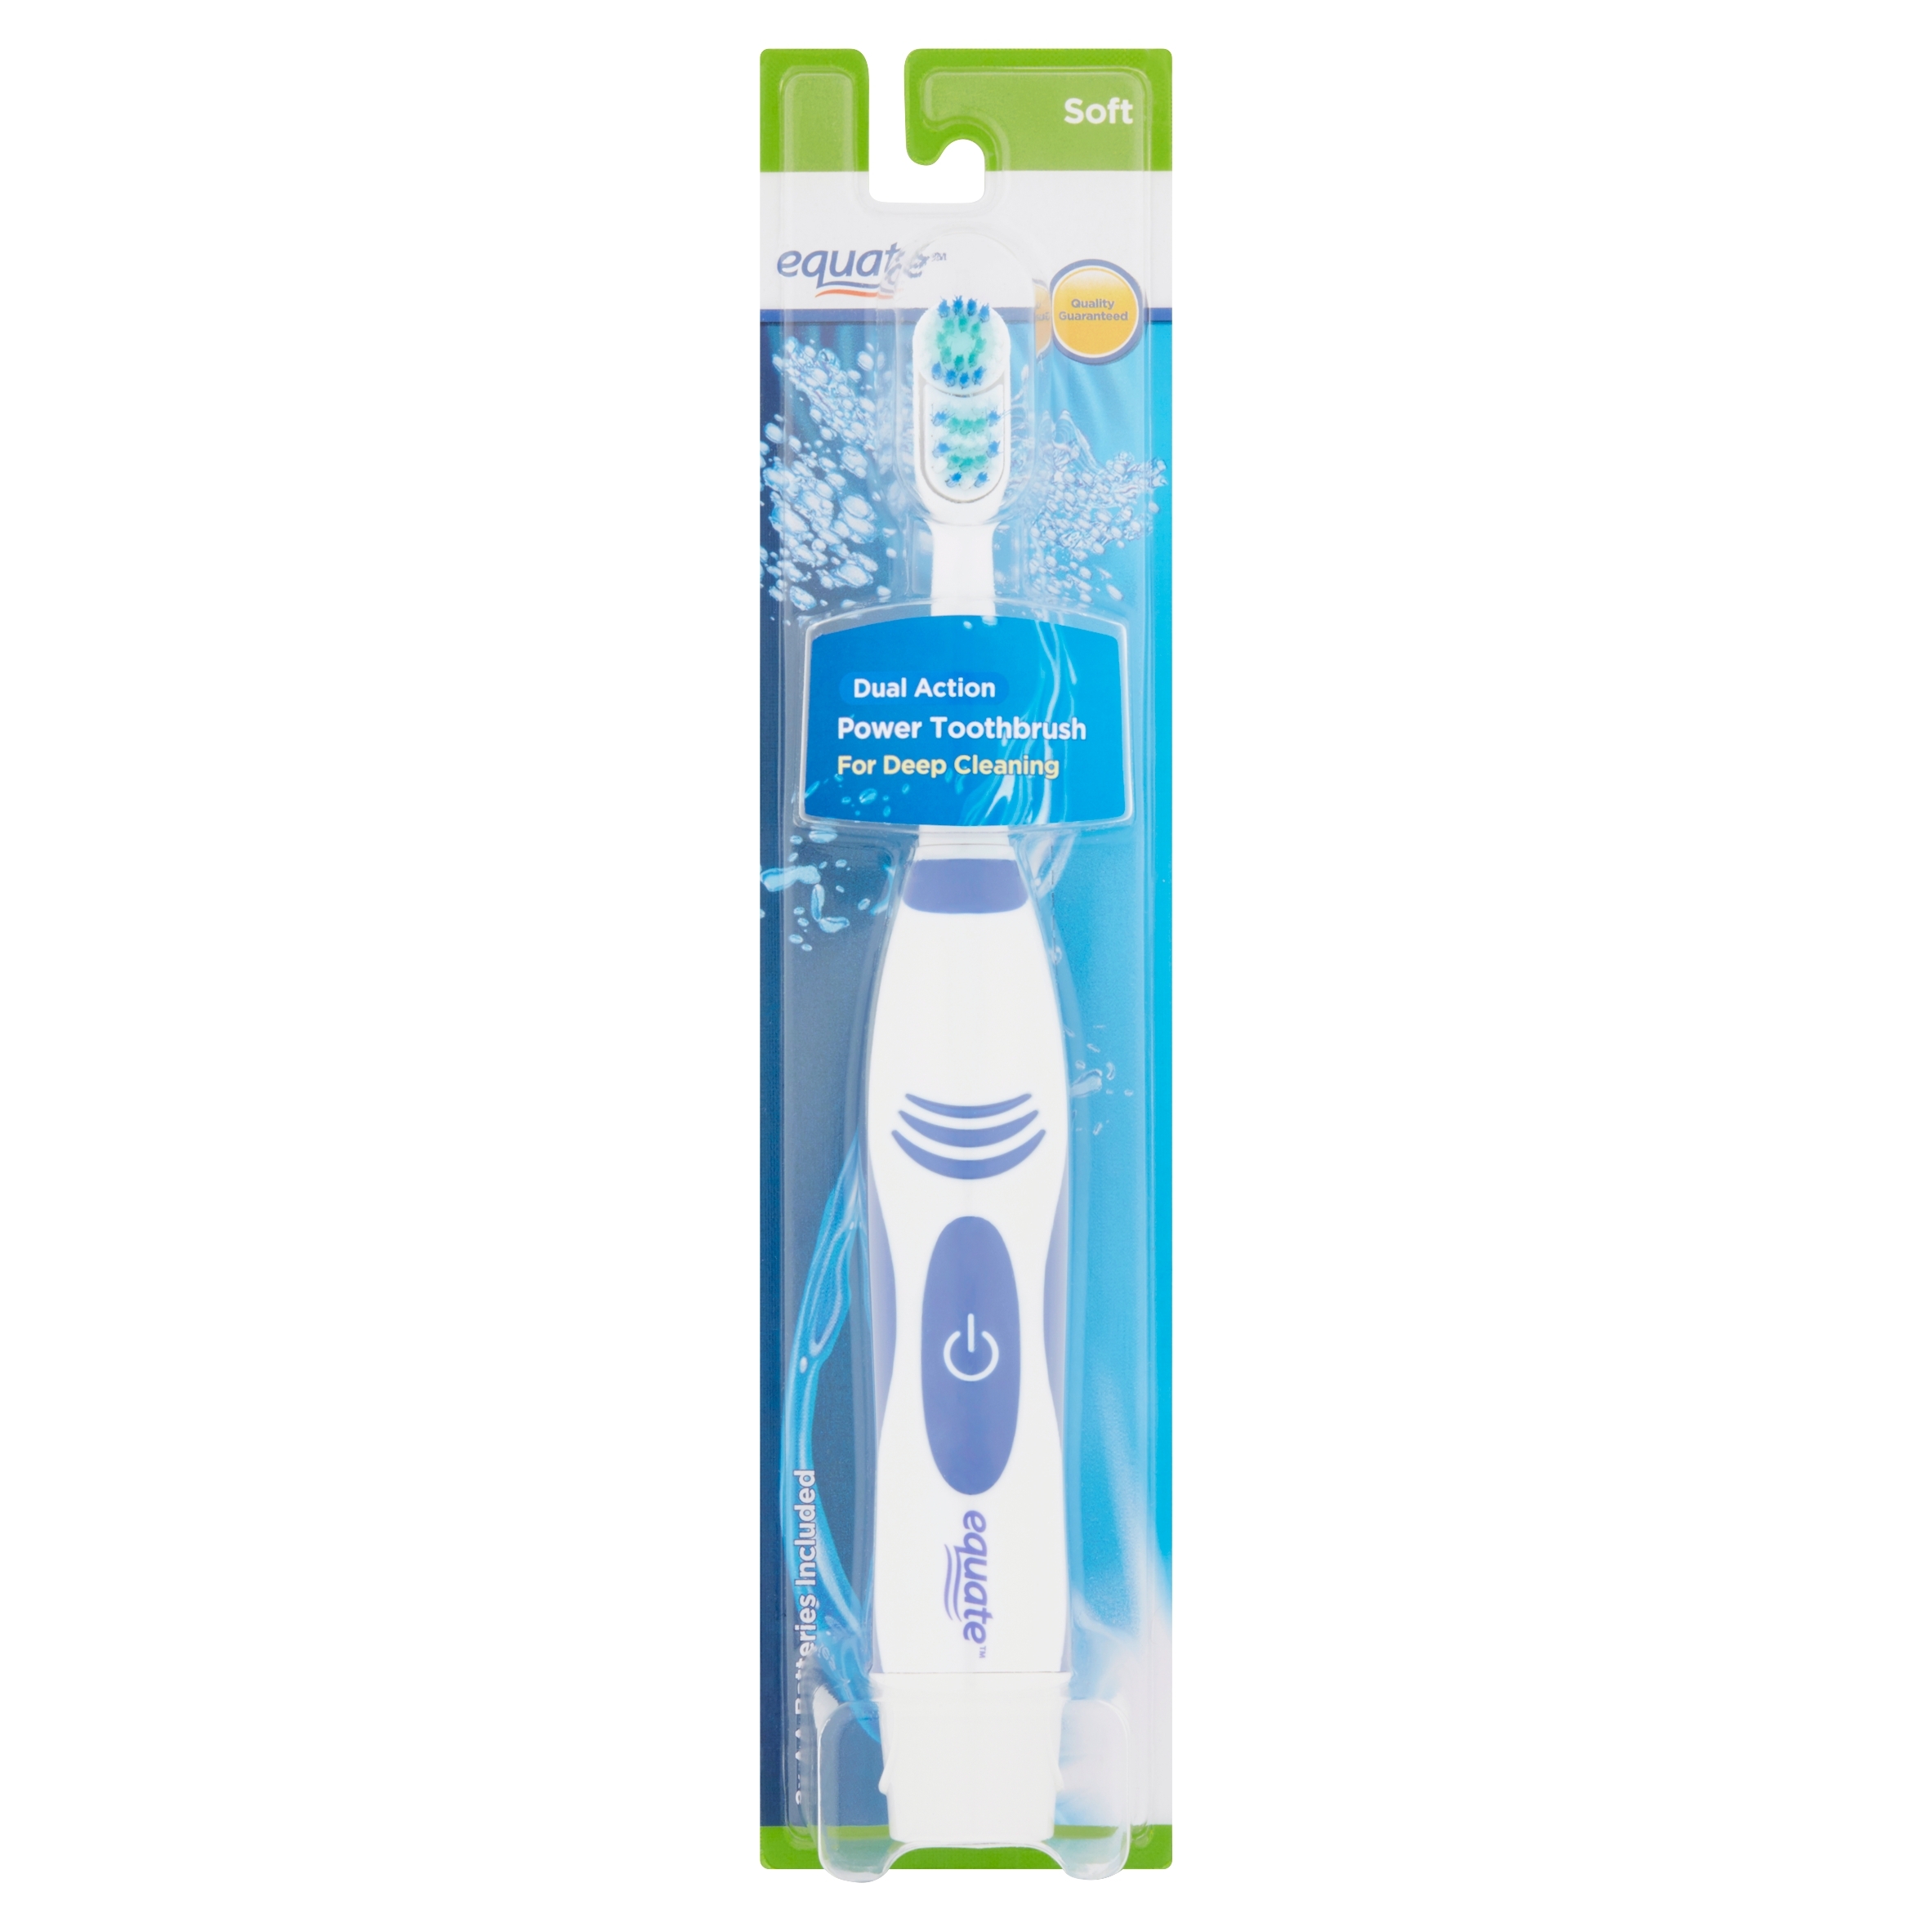 Equate soft dual action power toothbrush for deep cleaning, 1 count - image 1 of 9